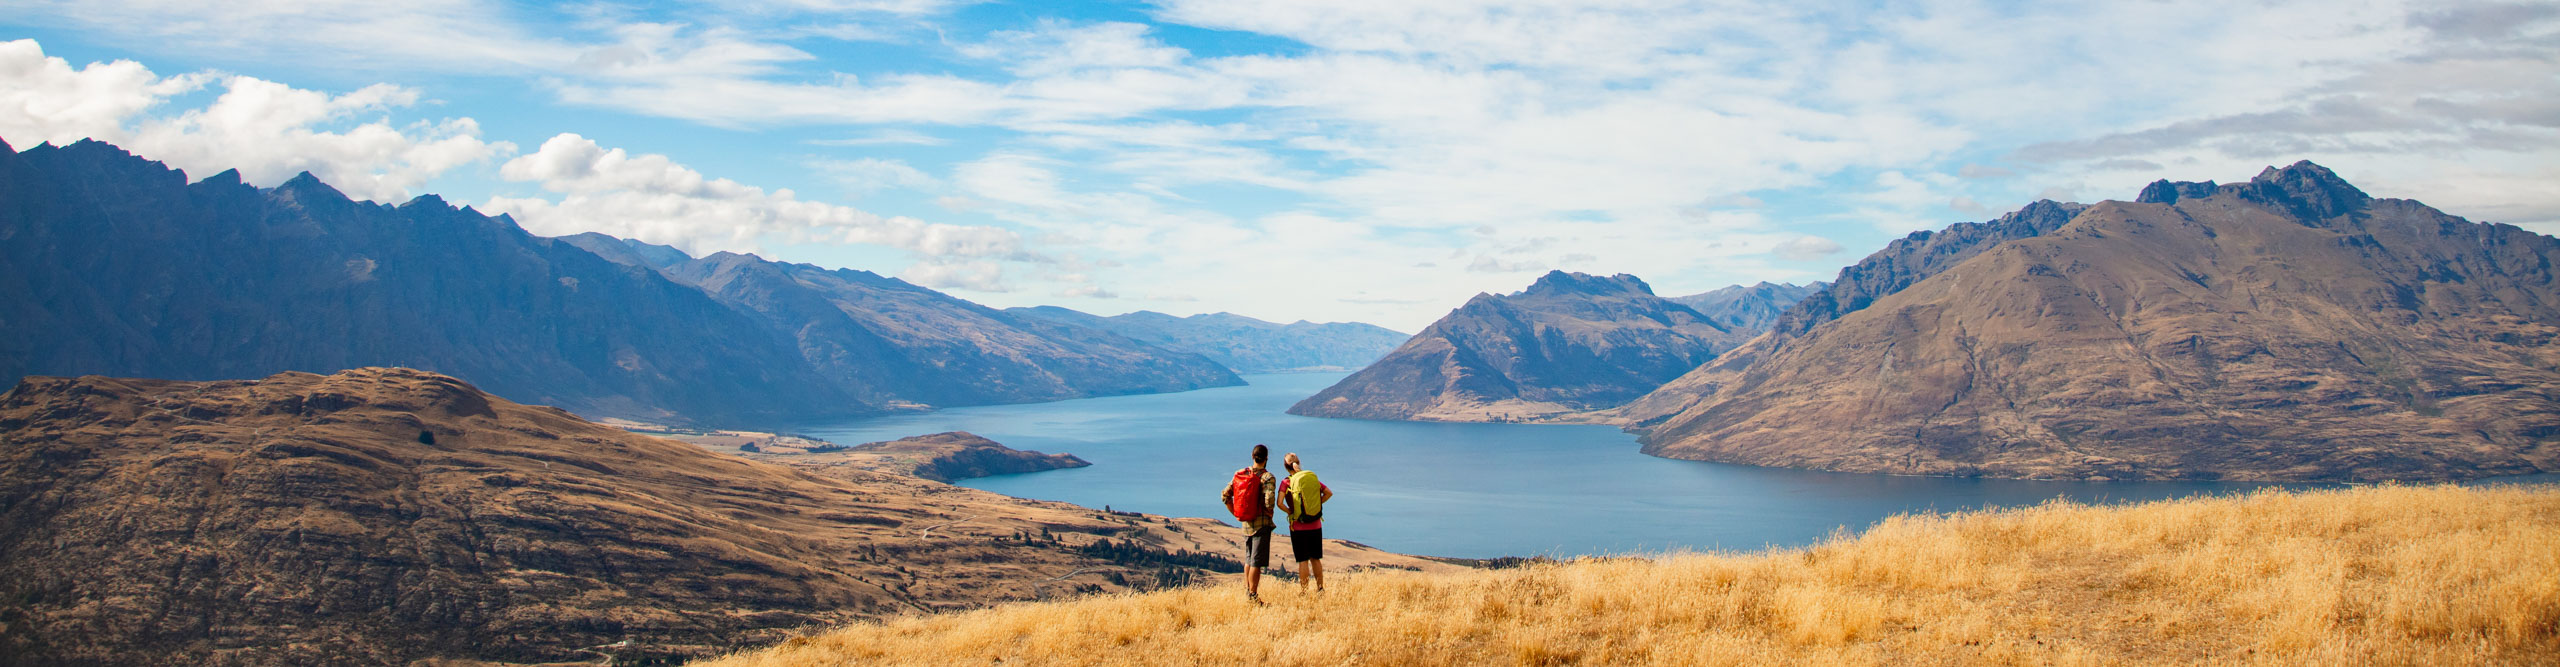 Hiker admiring the view of the Remarkables mountains and Lake Wakatipua, Queenstown, New Zealand